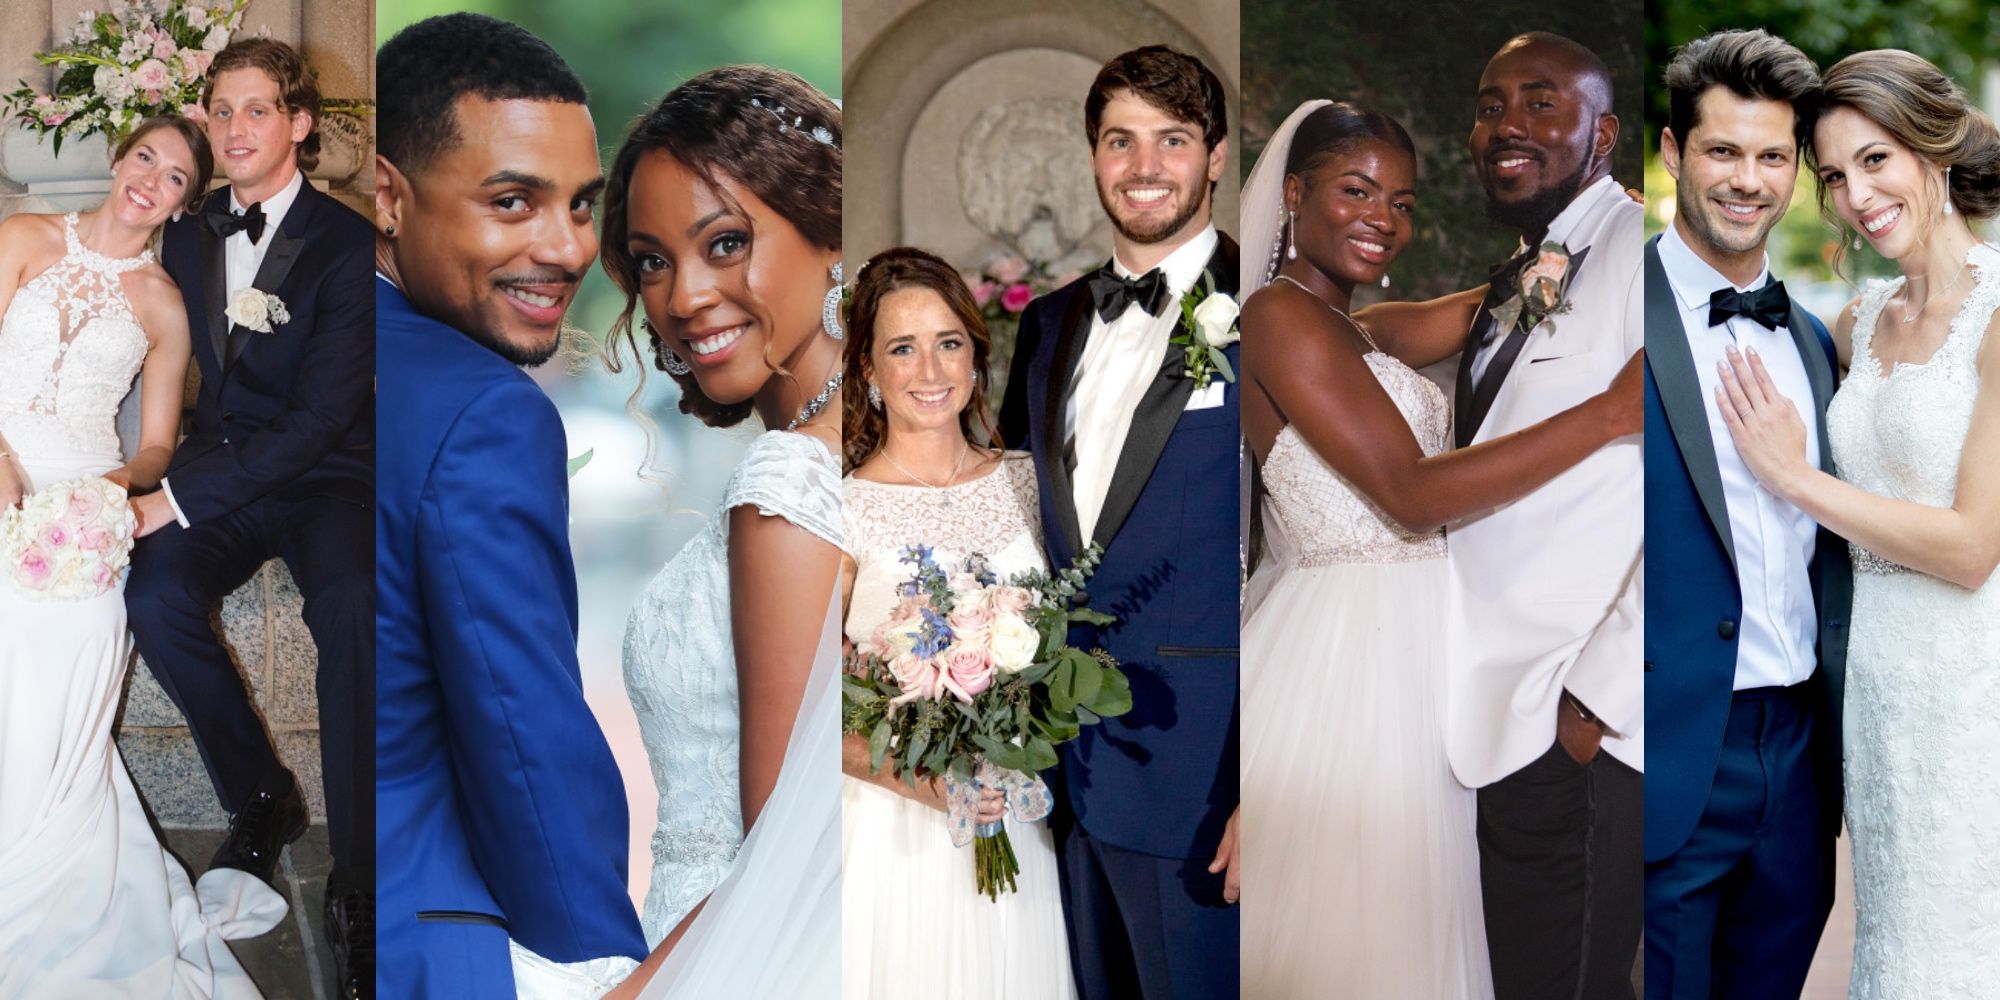 Married at First Sight Season 10 Couples